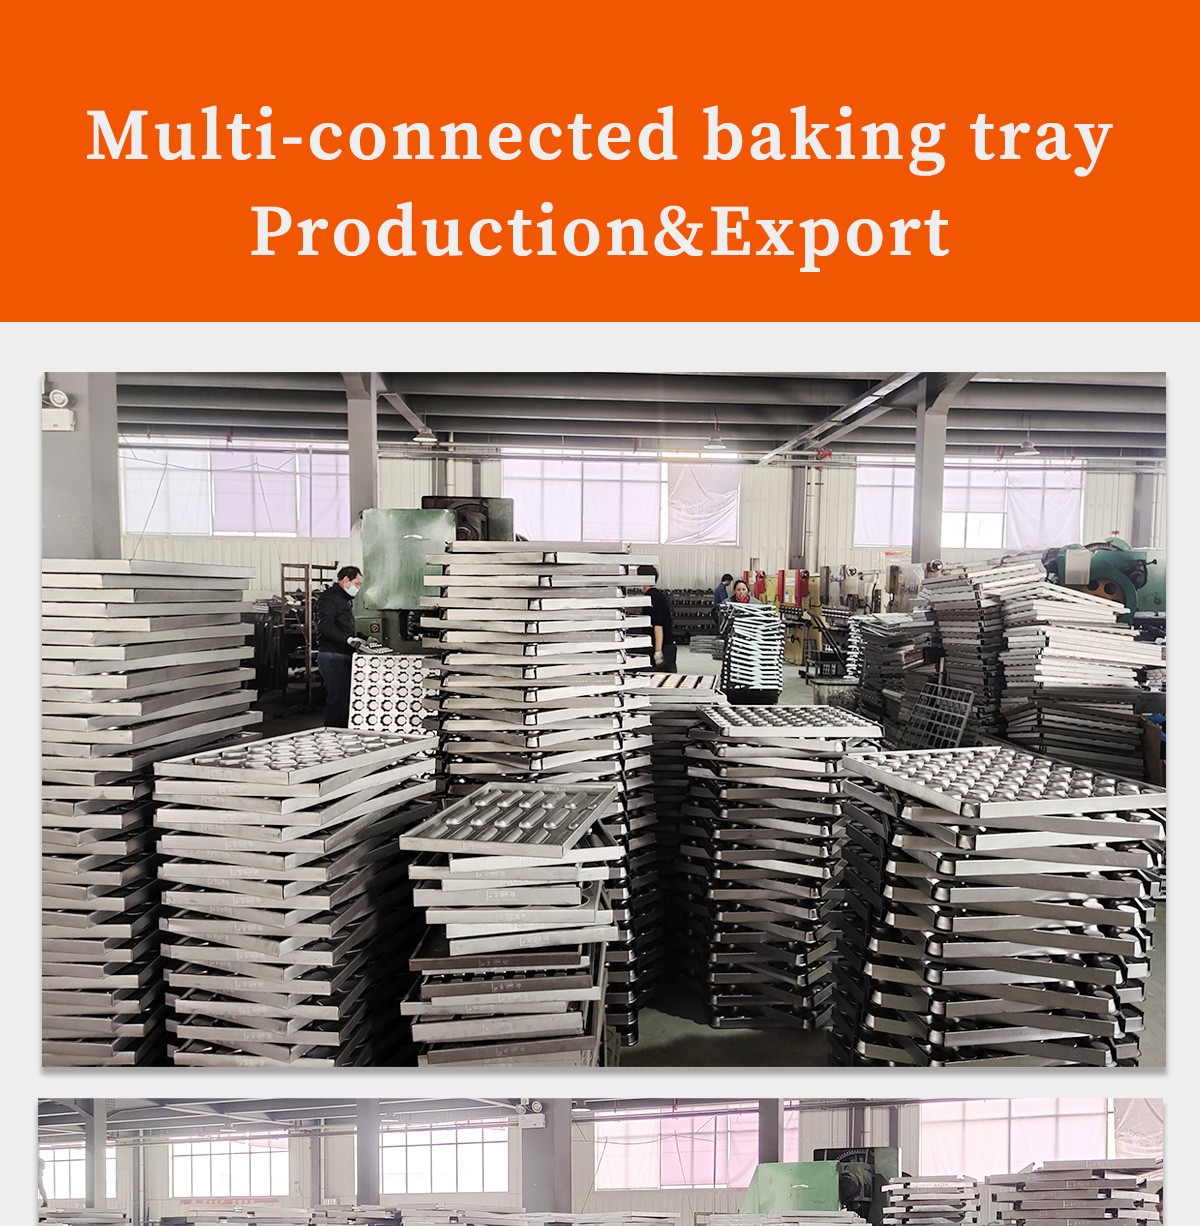  Multi-connected baking tray production workshop